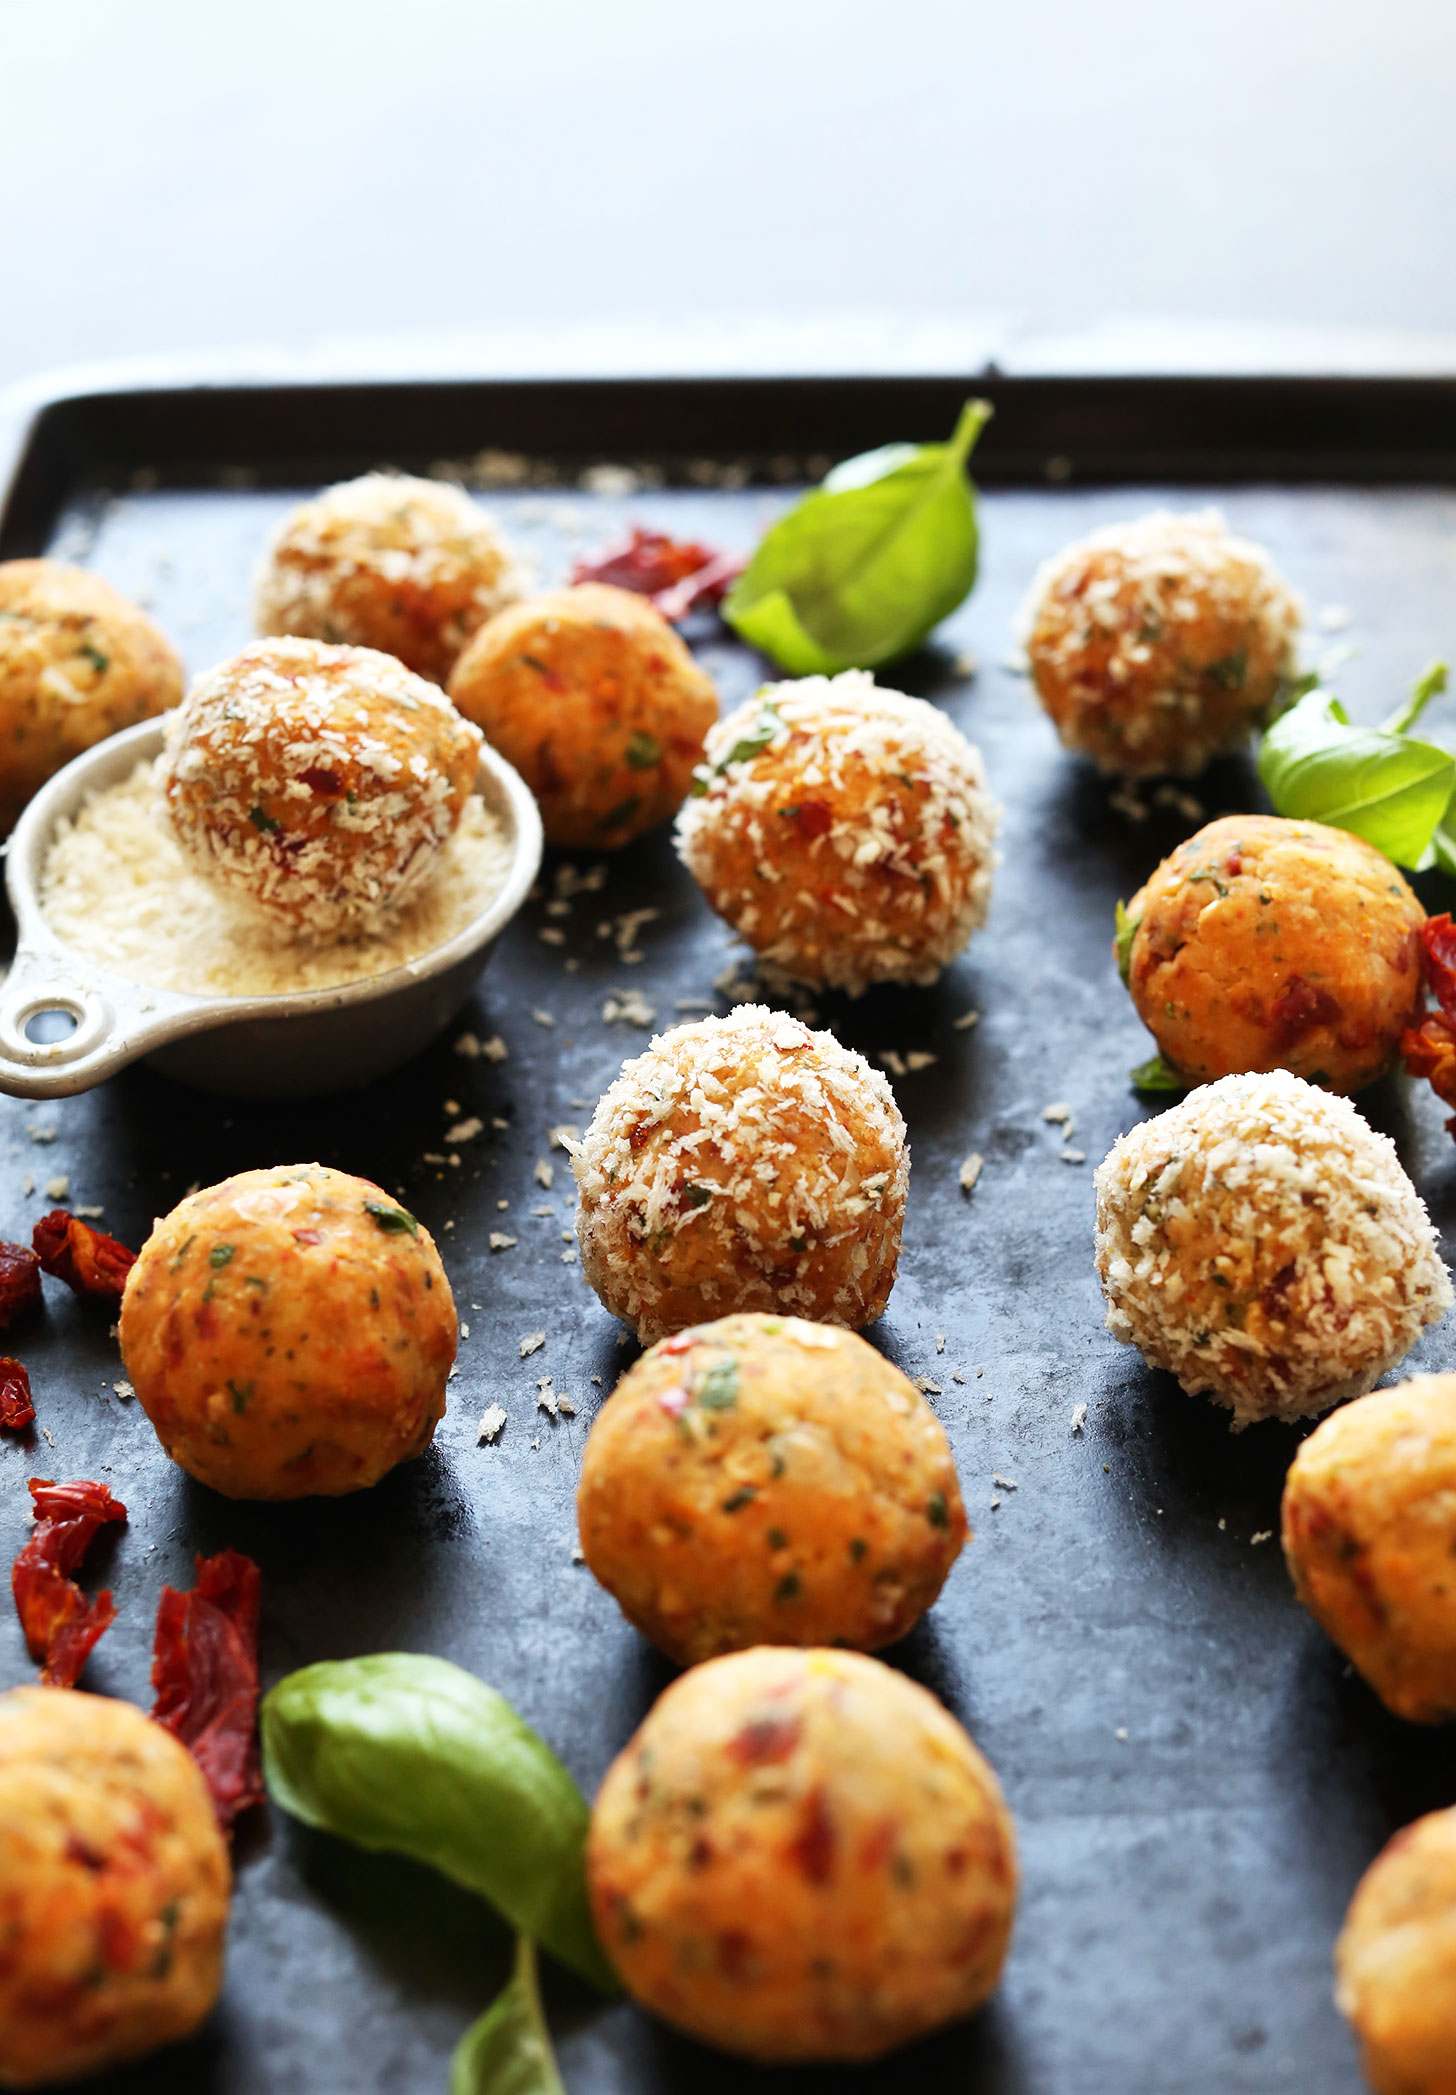 Baking sheet filled with a batch of our vegan Chickpea Meatballs with Sun-Dried Tomatoes and Basil